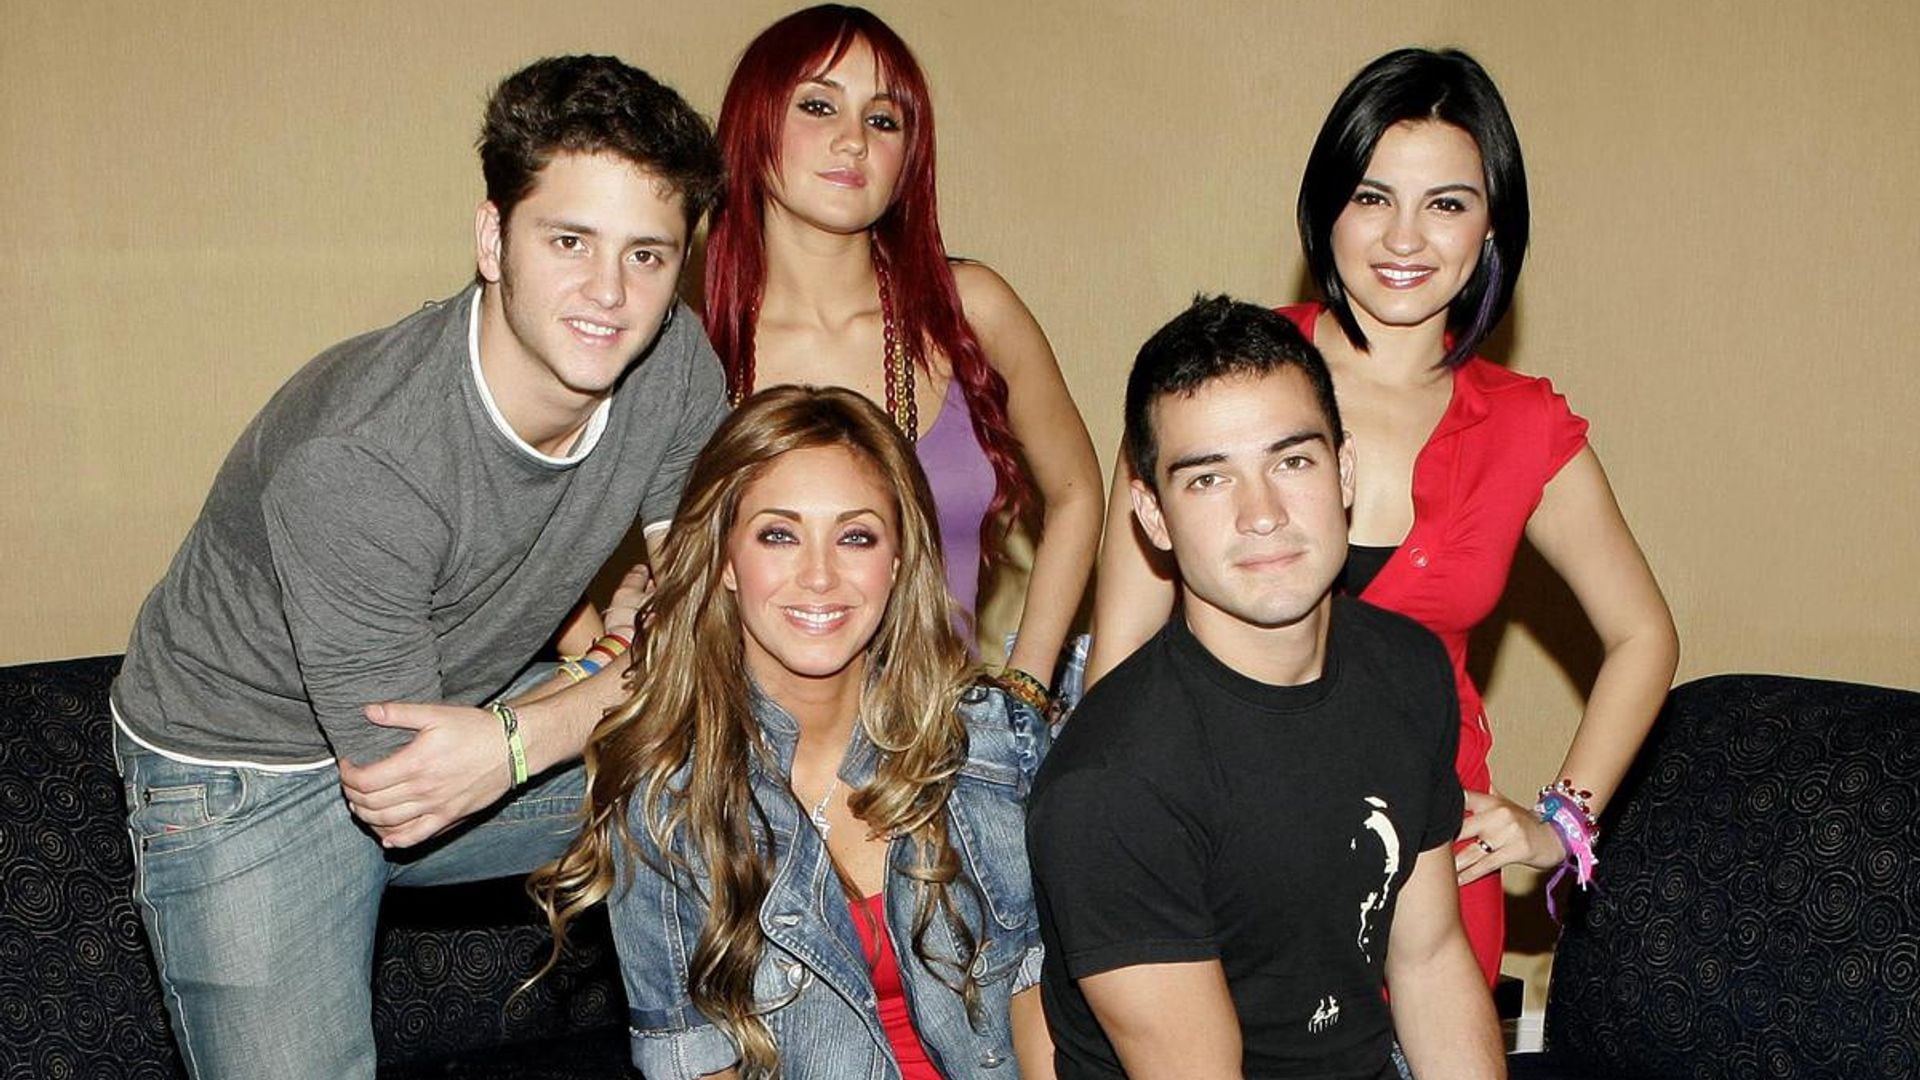 Press Conference with RBD - Rebelde in South Beach - October 17, 2006